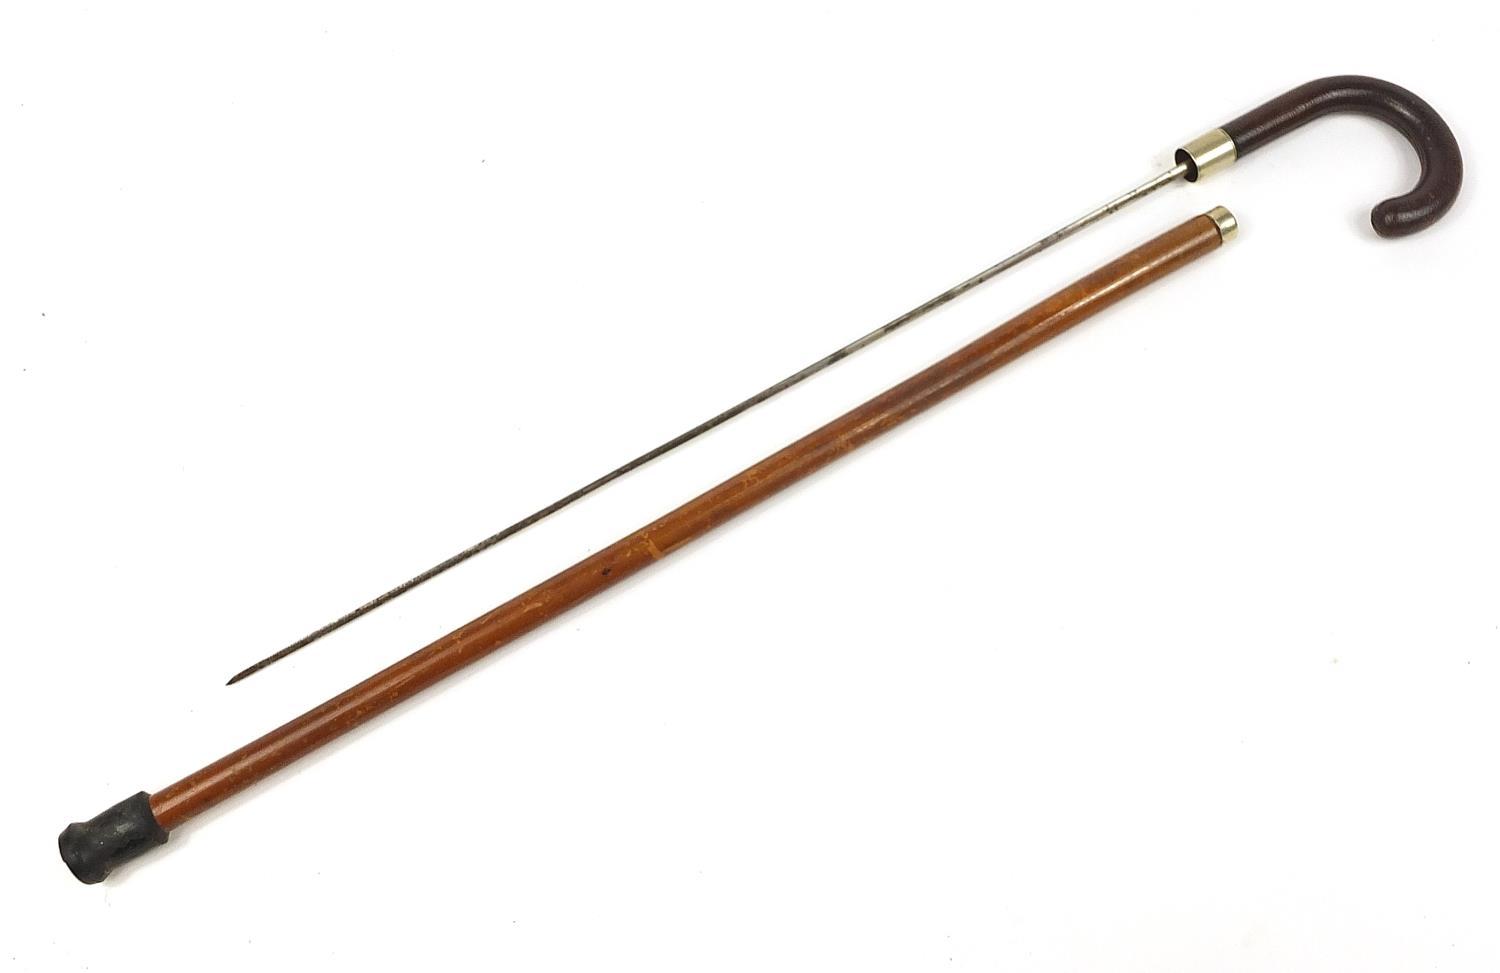 Malacca swordstick with leather handle and steel blade, 93cm in length - Image 2 of 5